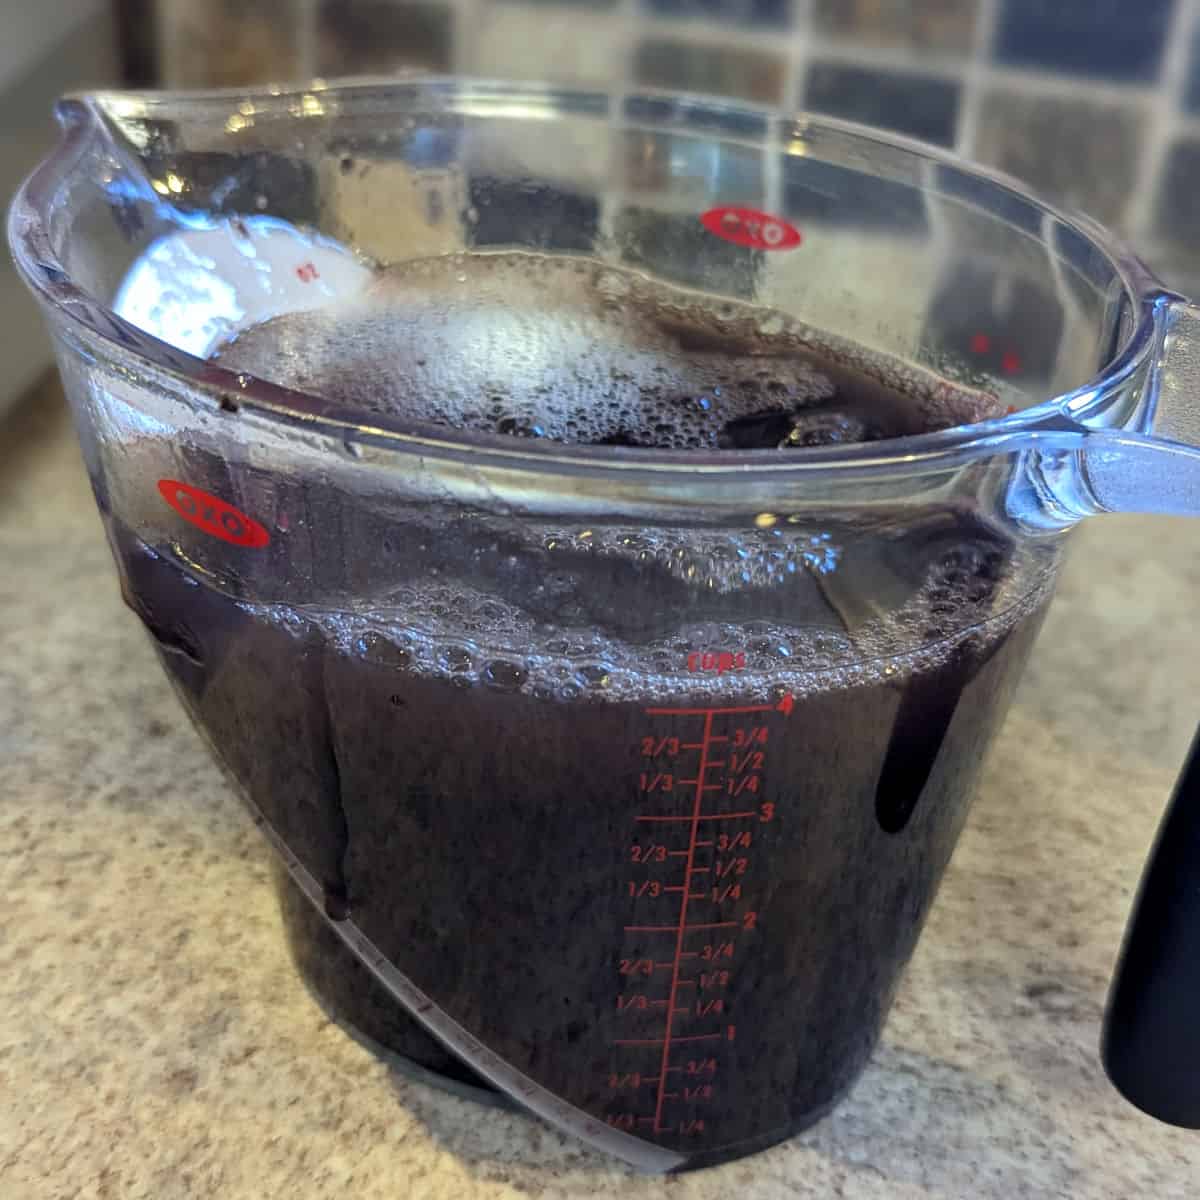 cooked beans in a 4 cup measuring cup, with liquid added to reach 4 cups volume